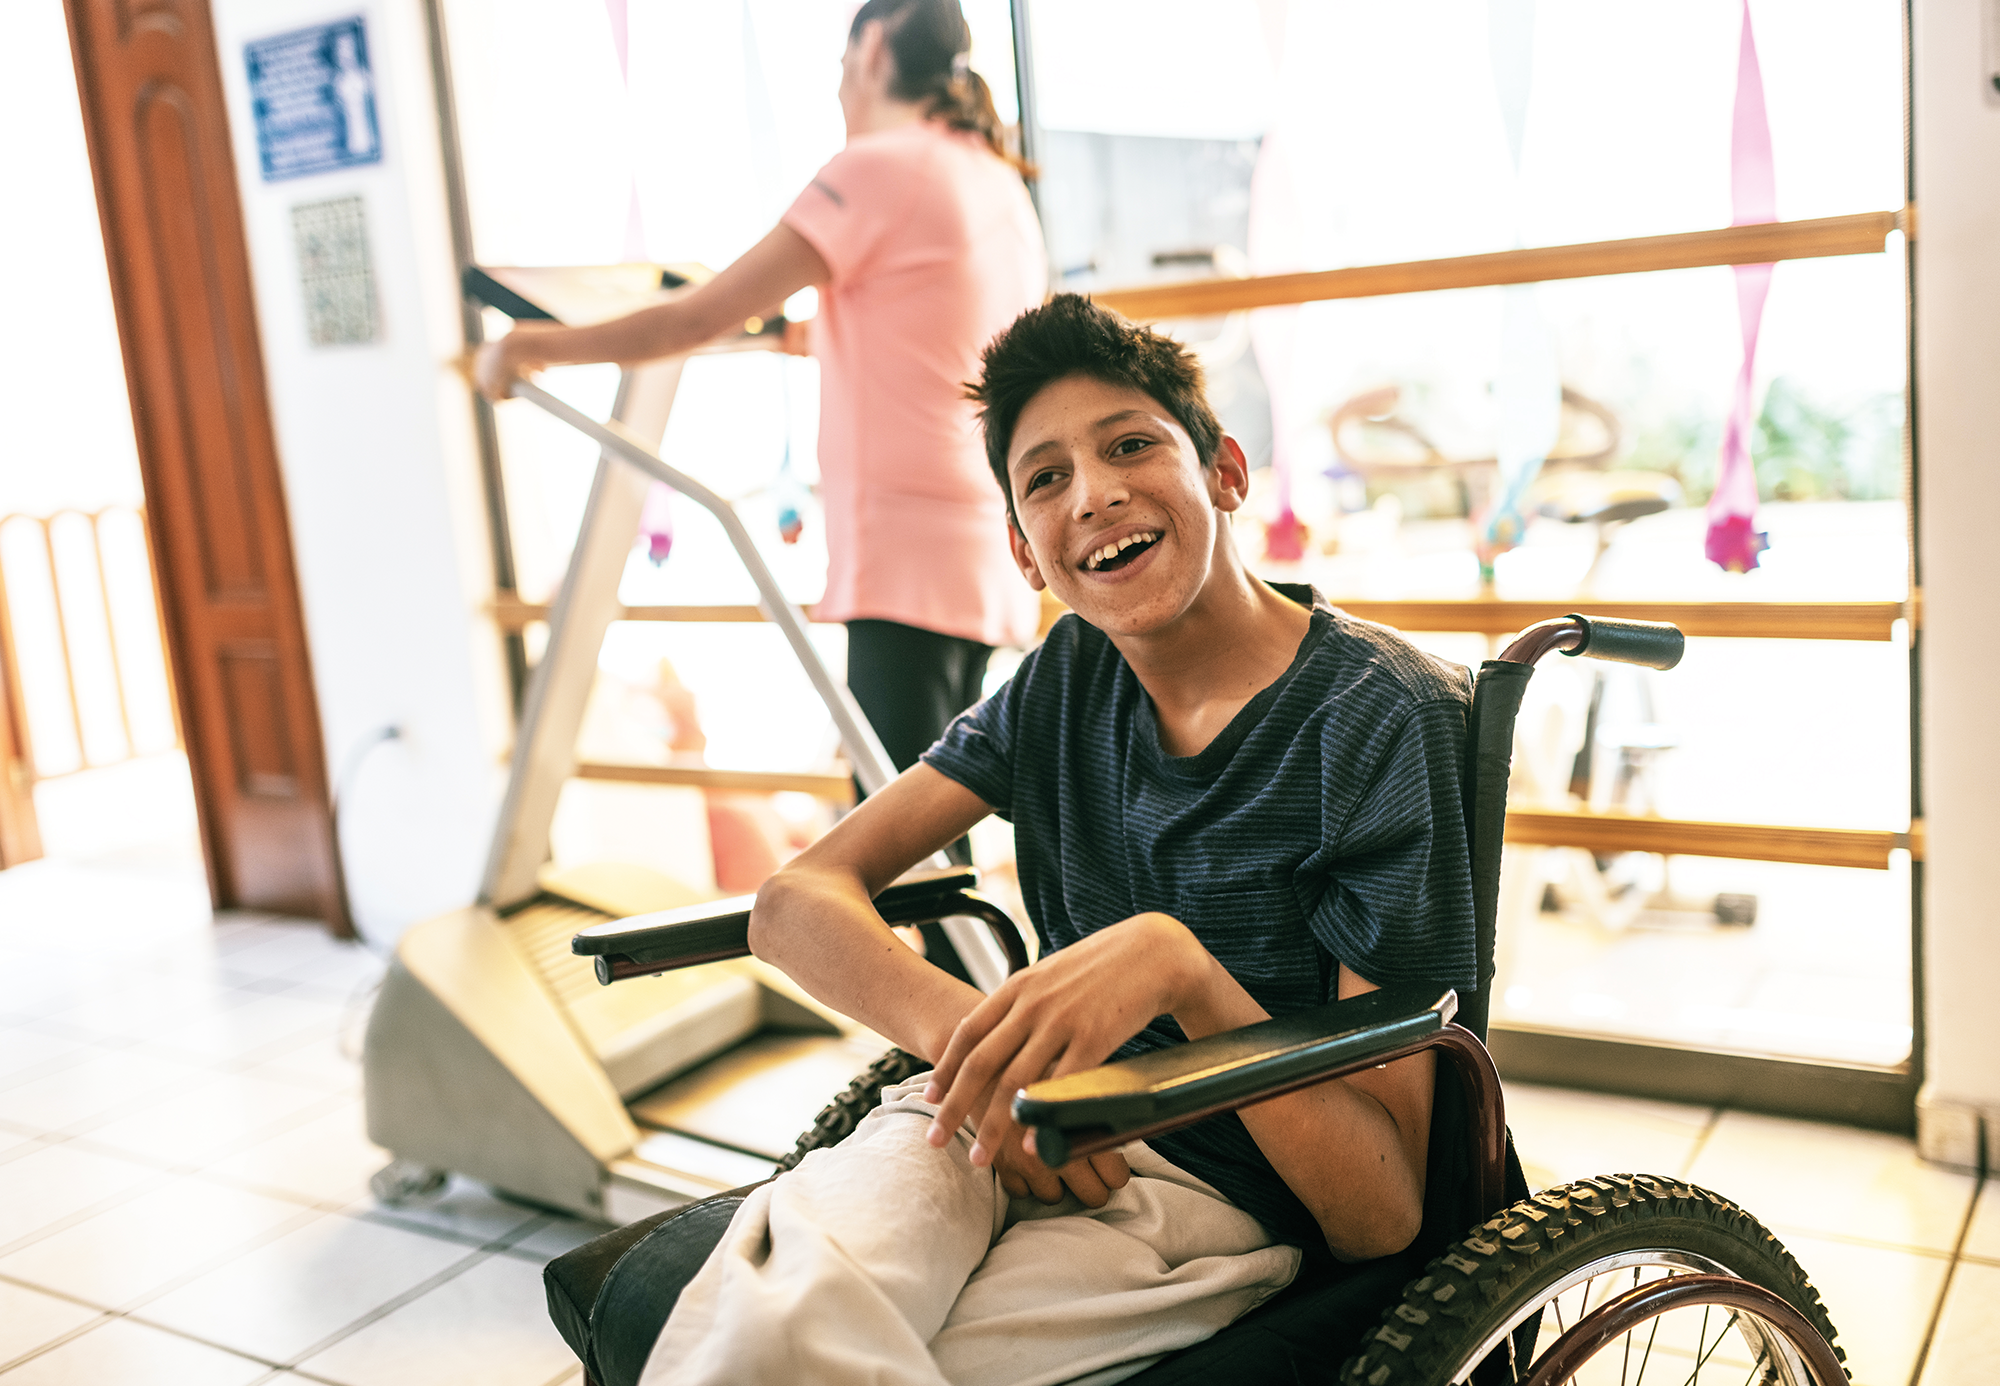 A young smiling disabled boy in a wheelchair within a gym like environment